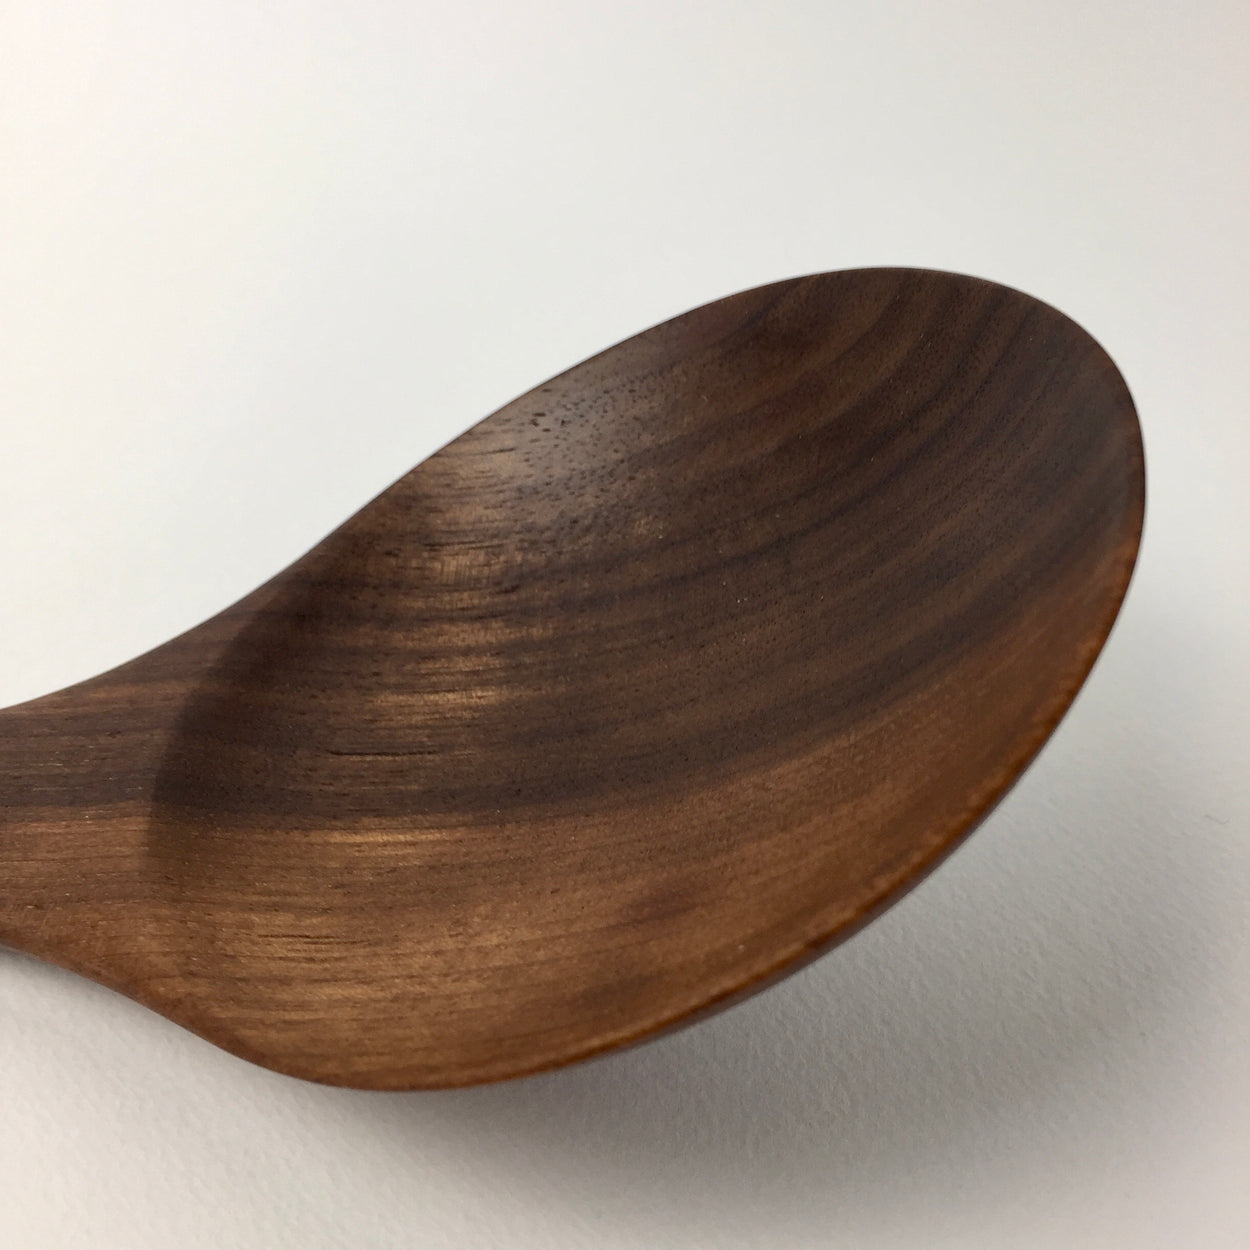 Close up view of Handmade Walnut Wood Soup Ladle with white background by Civil Dawn Studio